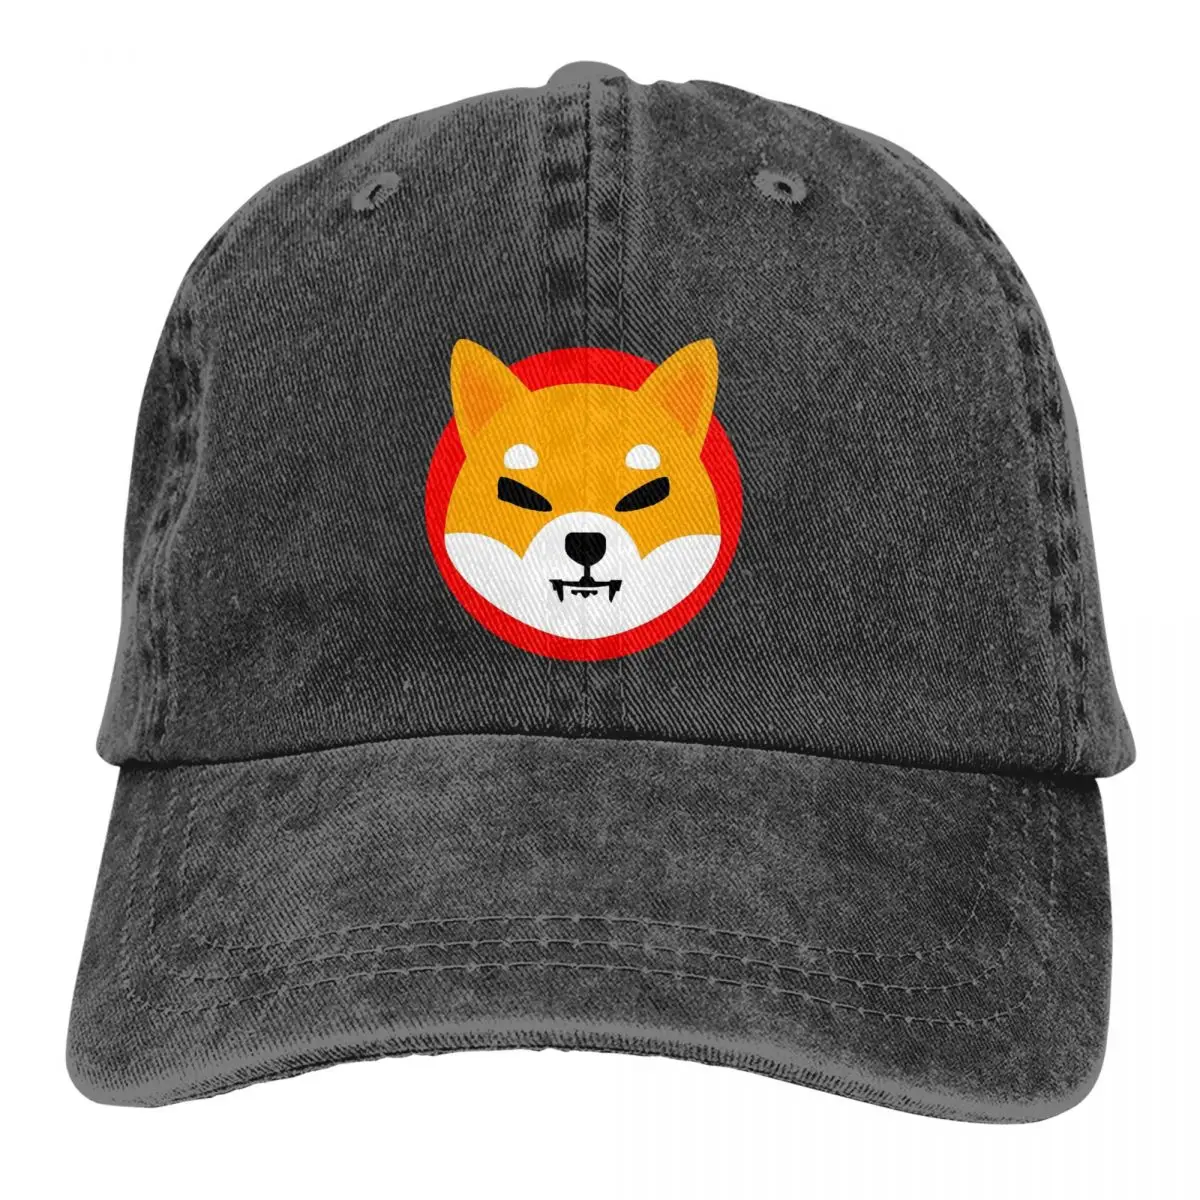 Crypto Shiba Inu Coin Multicolor Hat Peaked Women's Cap SHIB Personalized Visor Protection Hats